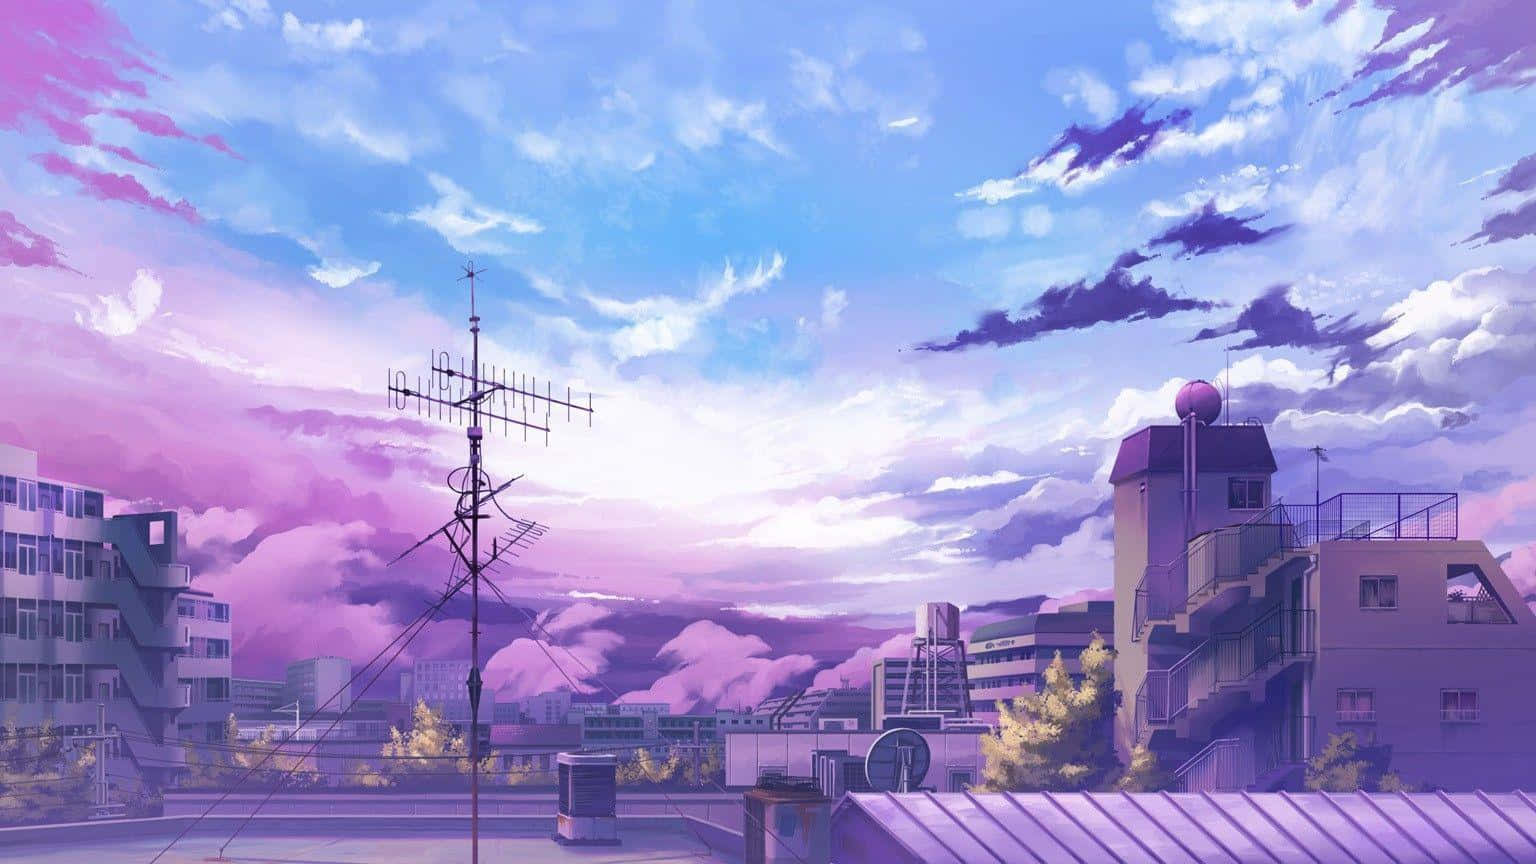 260+ Anime Landscape HD Wallpapers and Backgrounds